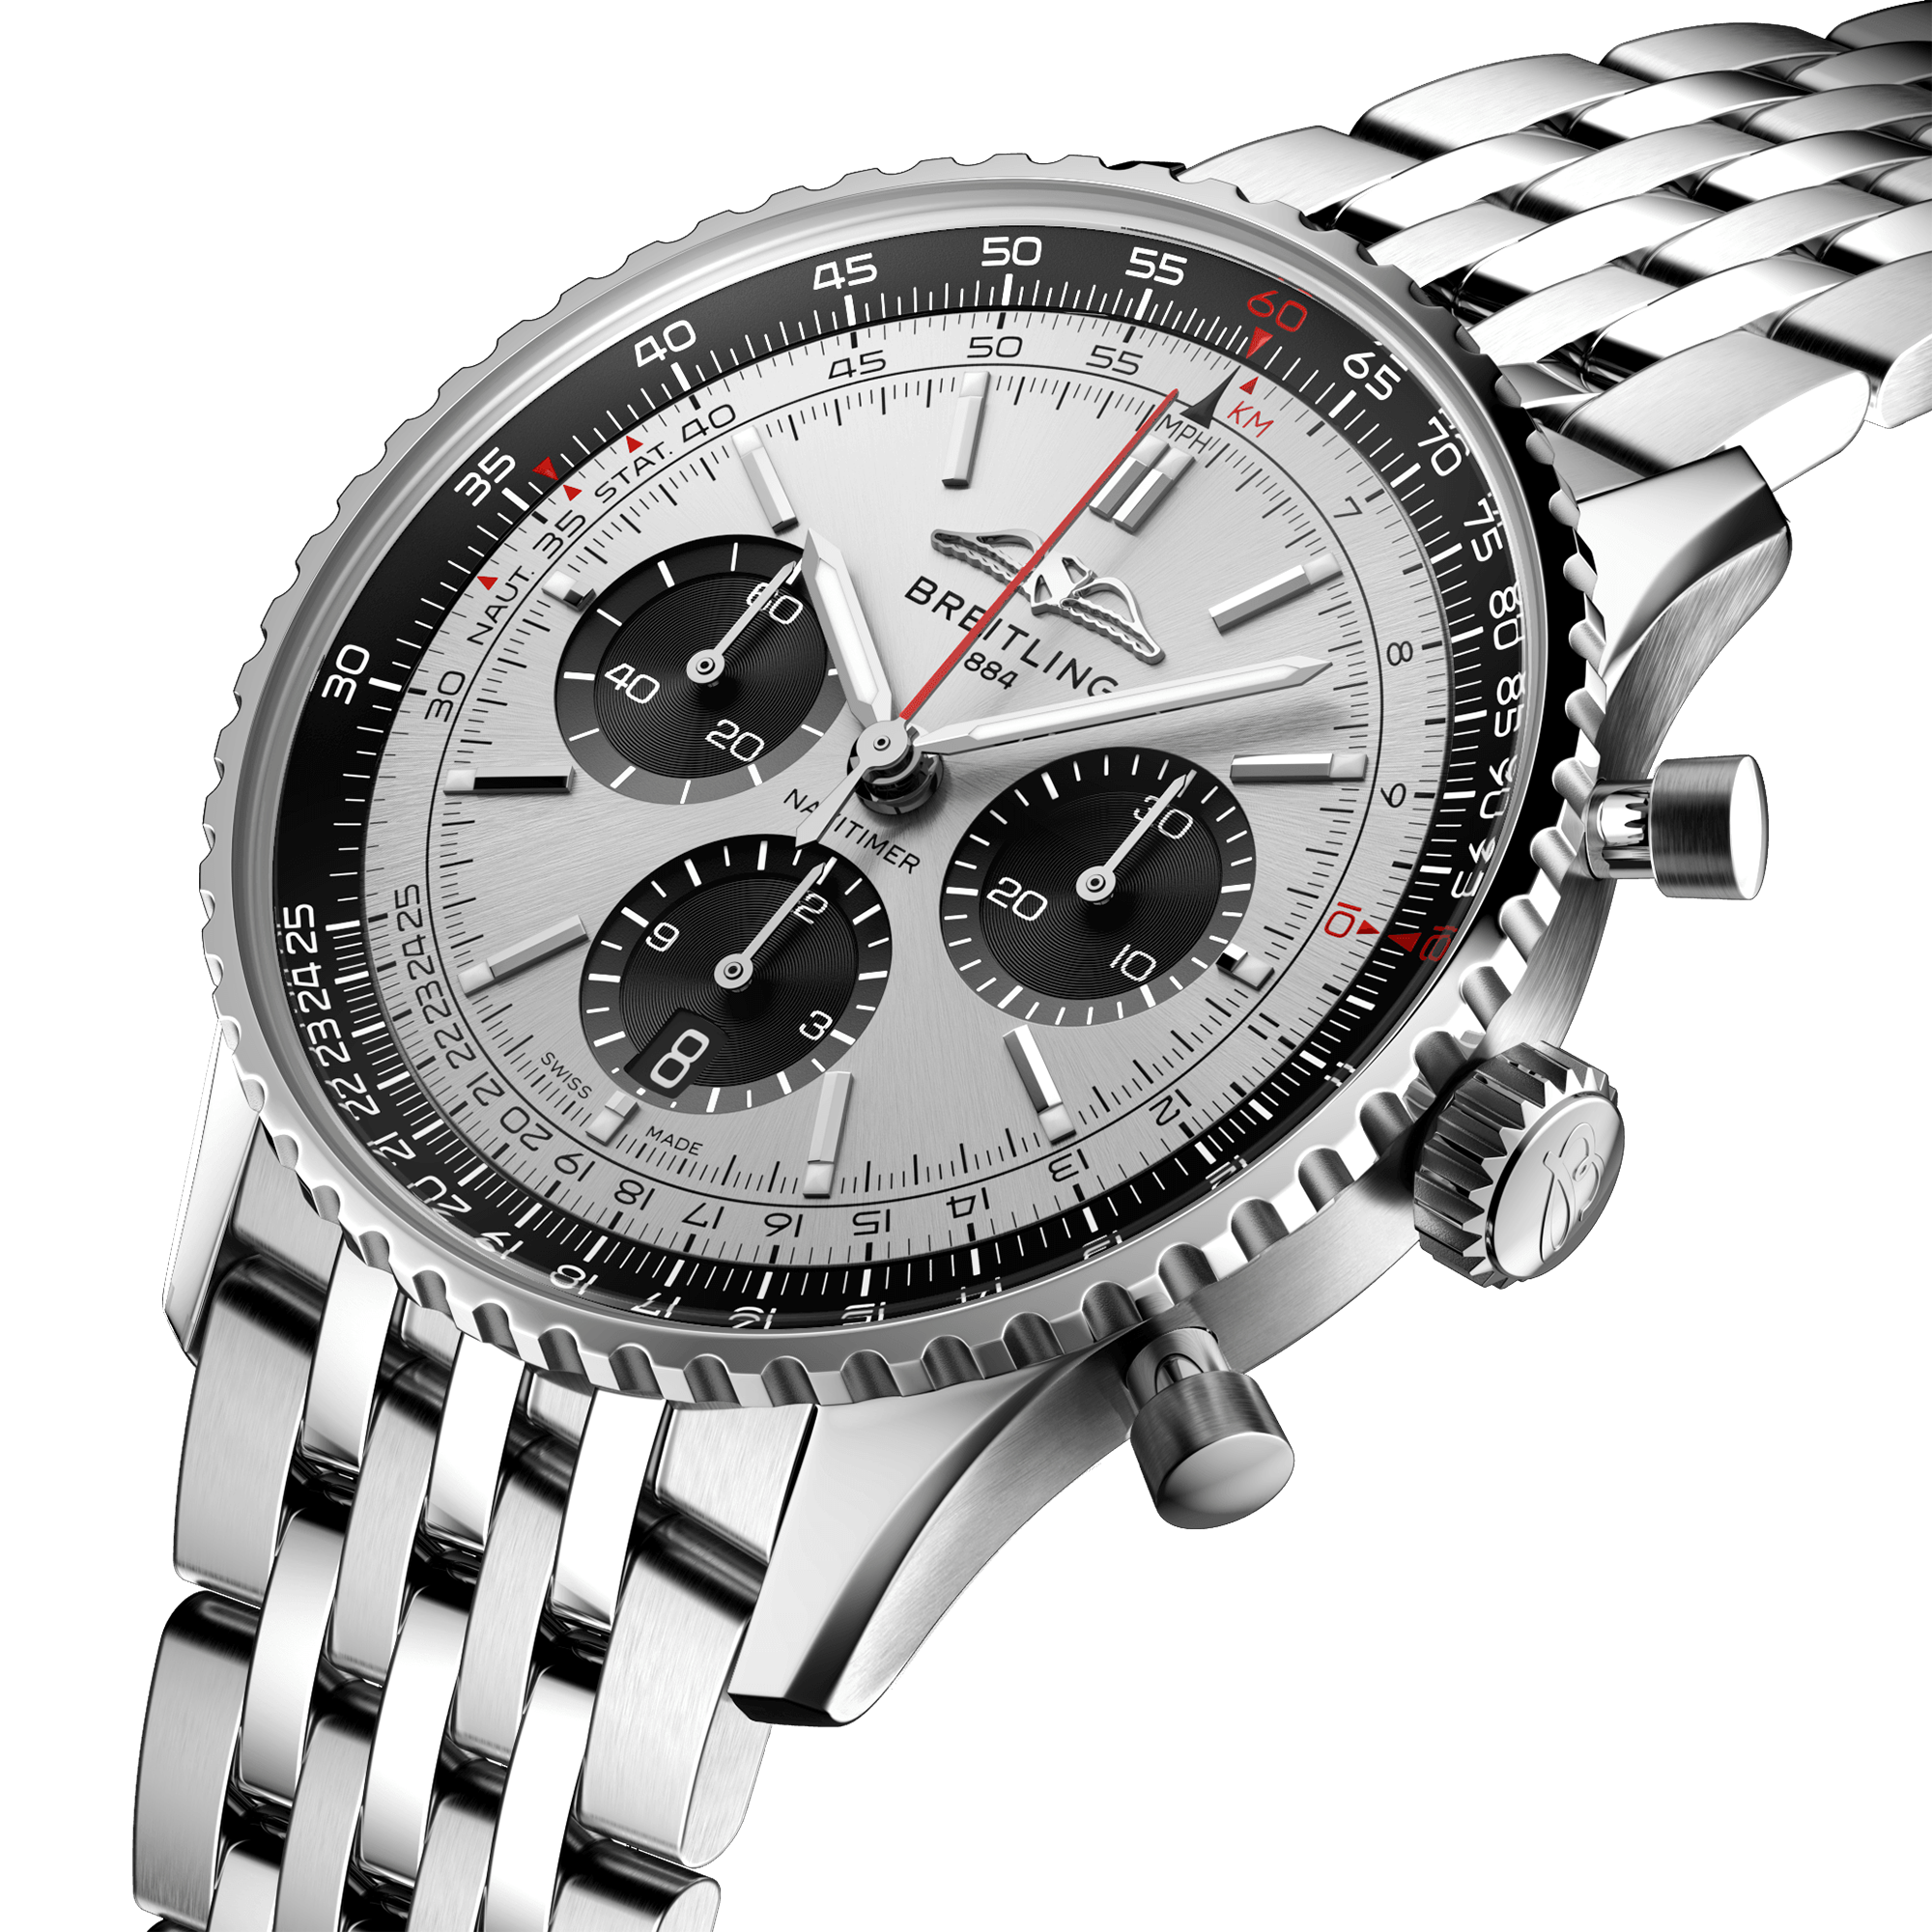 Navitimer 43mm Silver/Black Dial Automatic Chronograph Watch